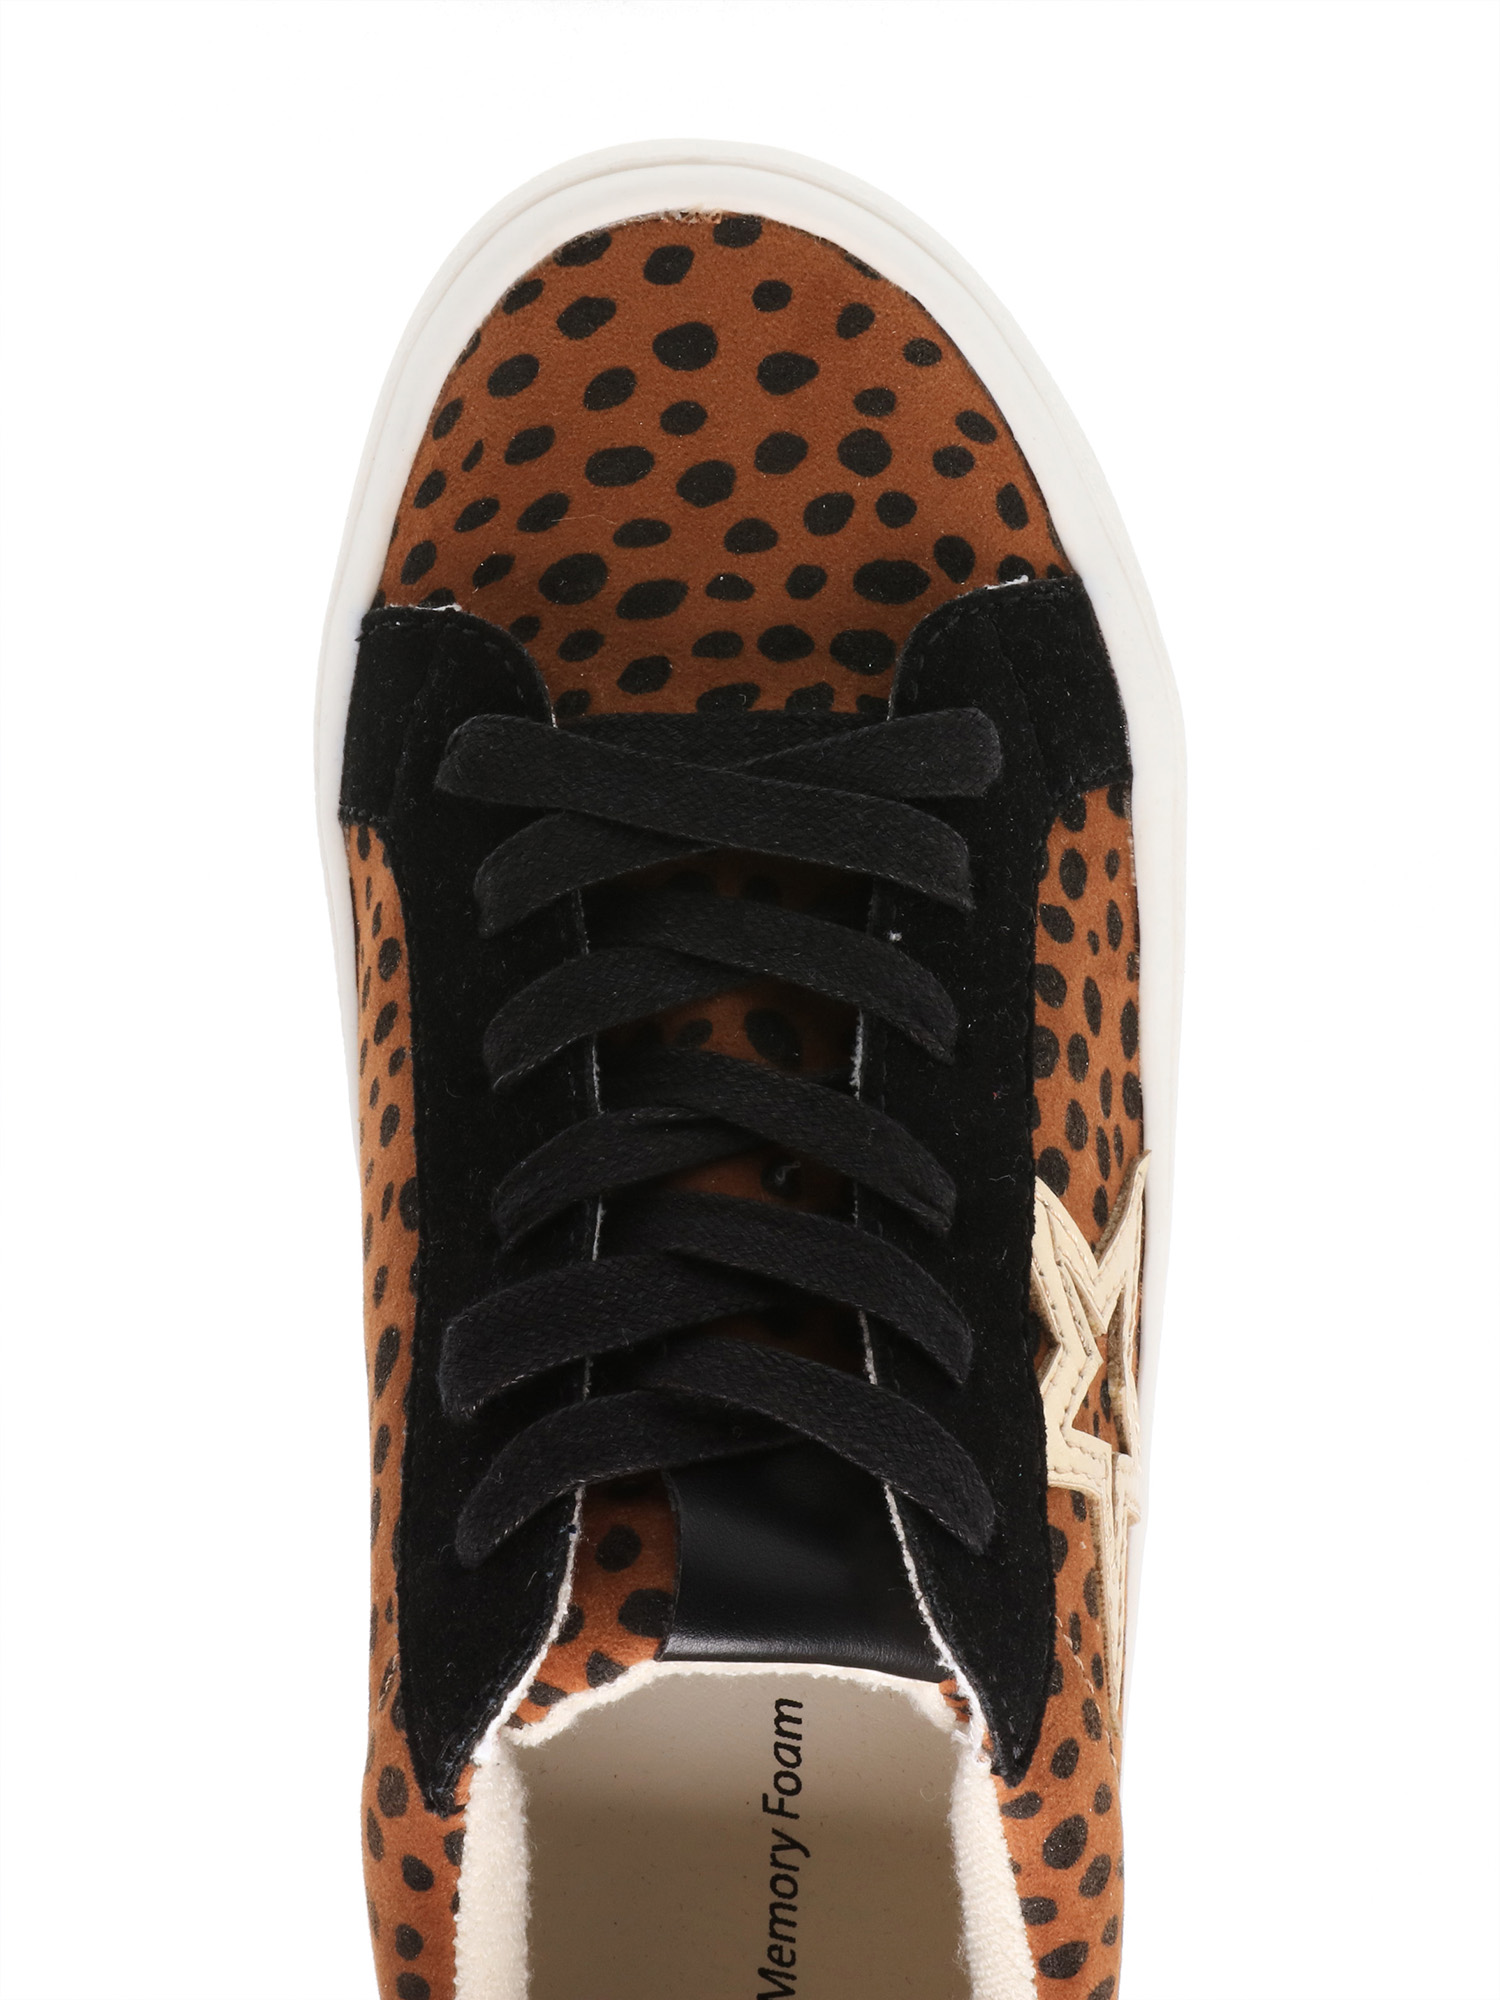 Time and Tru Women's Fashion Sneaker - image 4 of 6